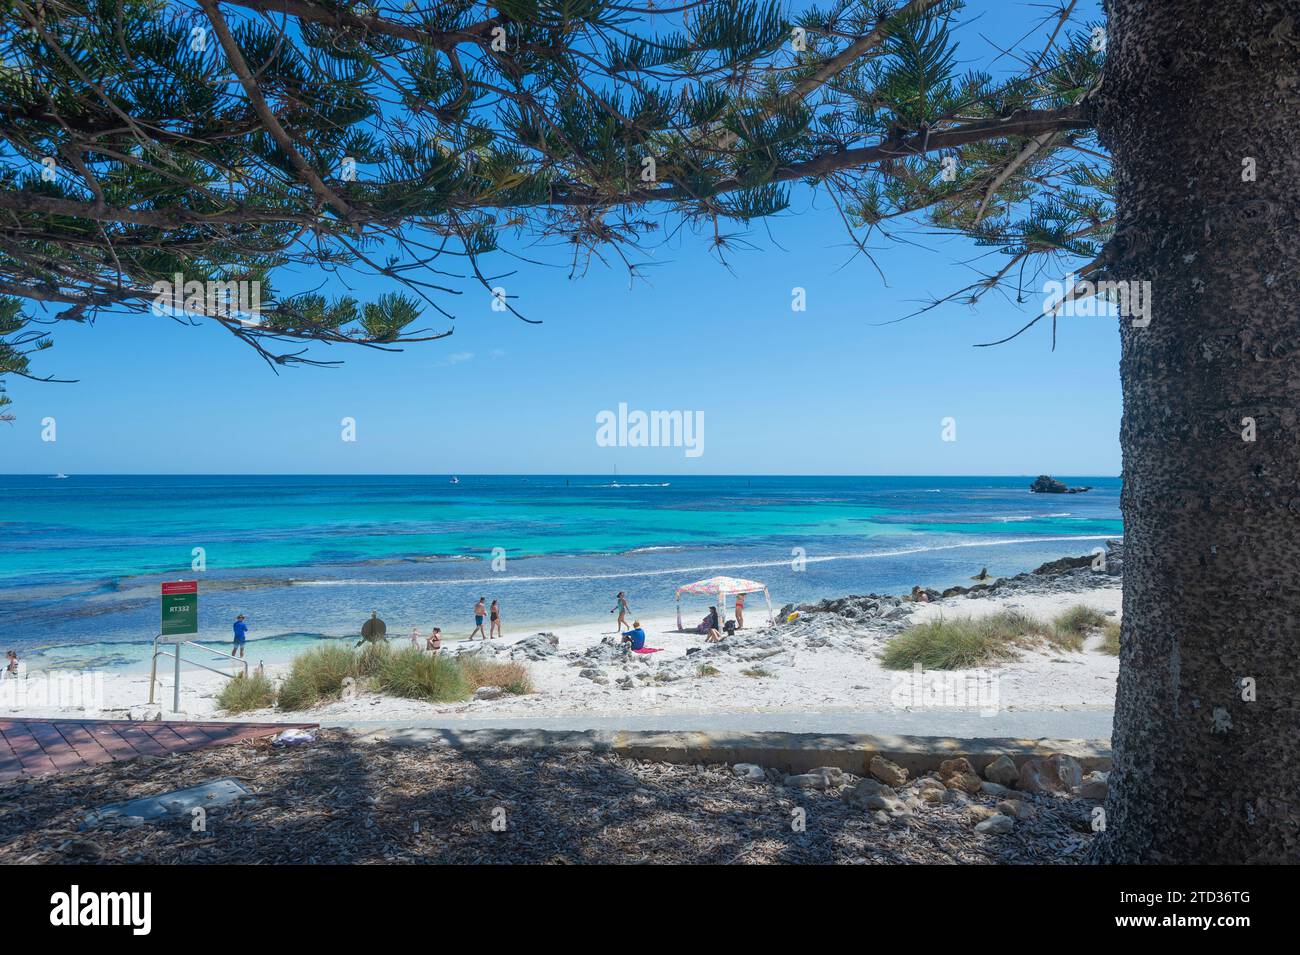 Scenic view of the Basin with people sitting on an idyllic white sandy beach and  turquoise water on Rottnest Island or Wadjemup, Western Australia, A Stock Photo